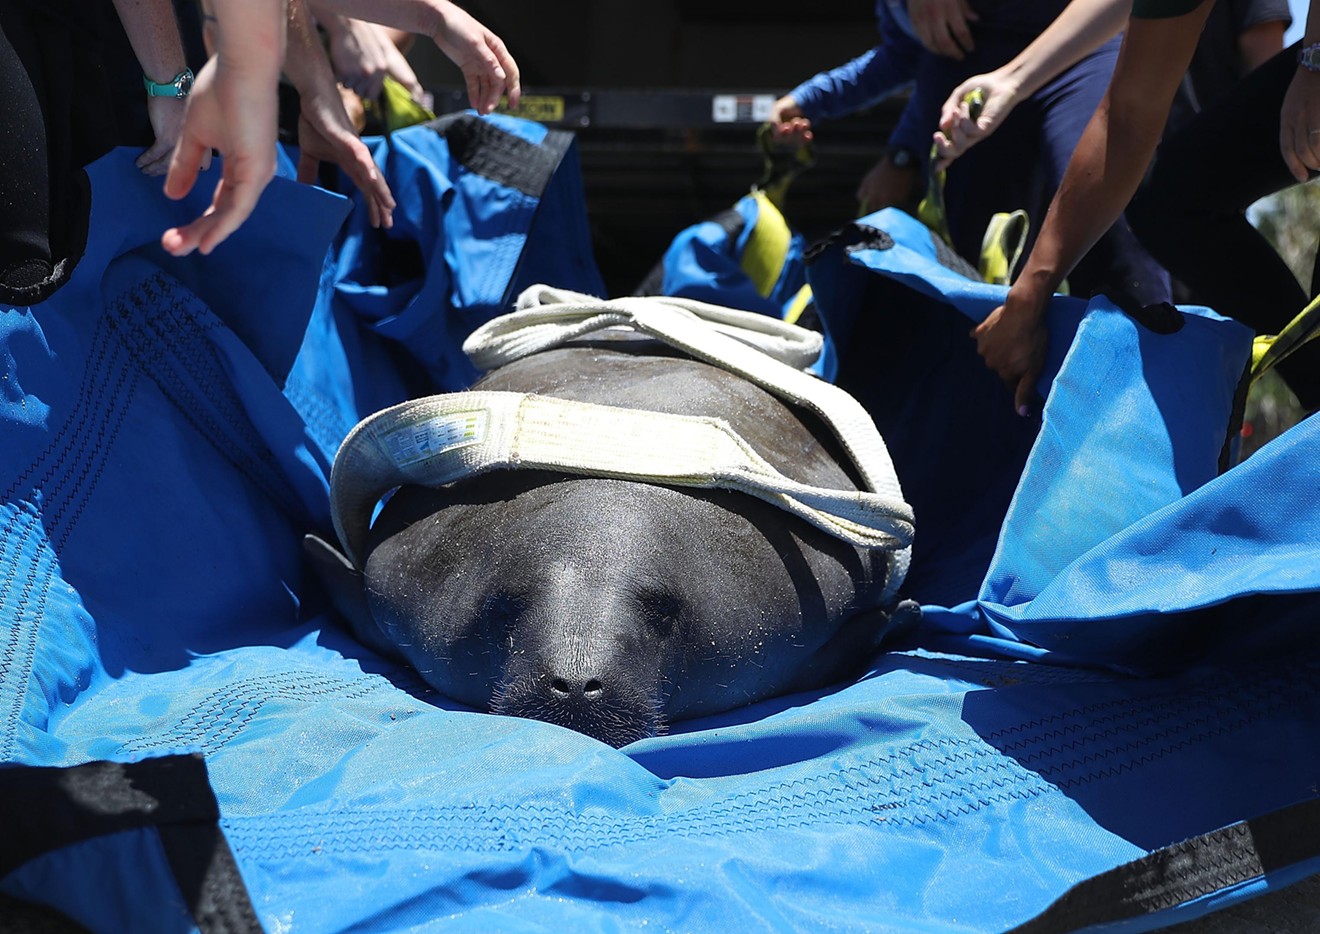 Miami Seaquarium rescue workers prepare to release a manatee into the Loxahatchee River at the Jonathan Dickinson State Park boat ramp in Jupiter, Florida, on June 21, 2016. Though some advocates called for Seaquarium manatees Romeo and Juliet to be released into the wild, others argued it would be safer to transport them to another marine park.